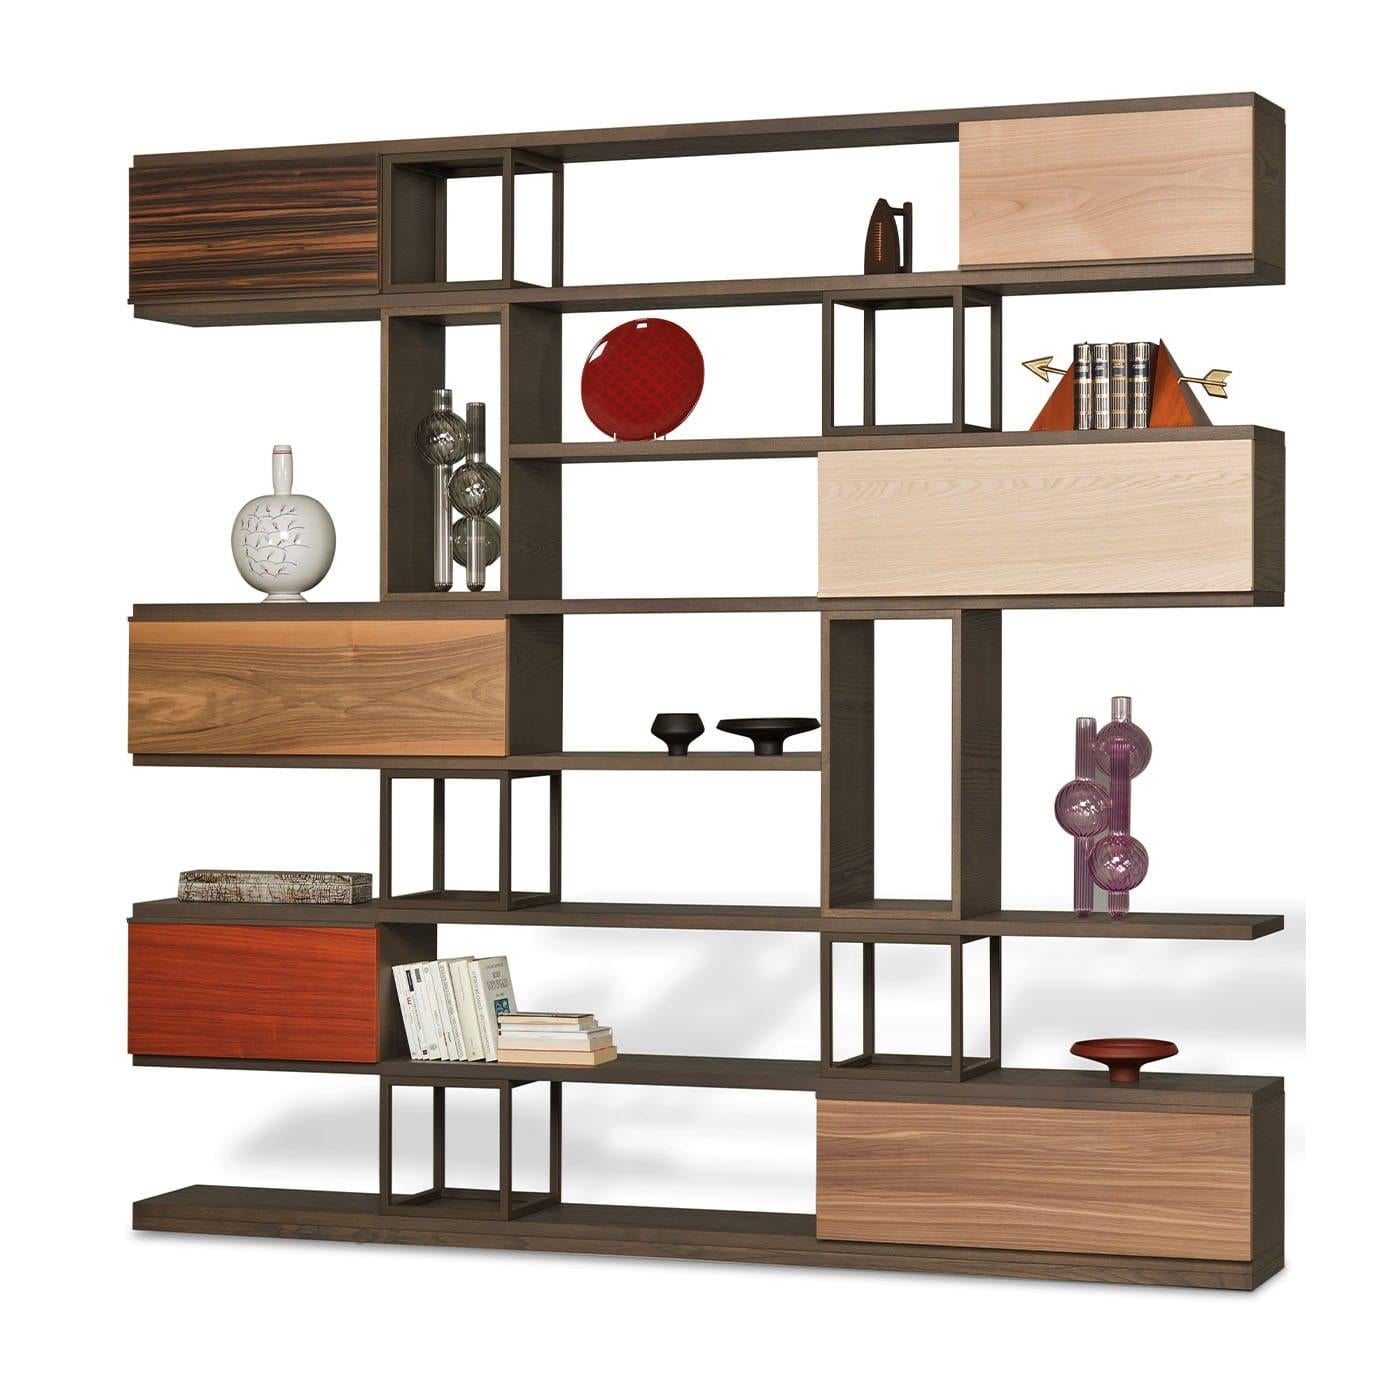 An extraordinary game of lines and perspectives, this bookcase designed by Libero Rutilo merges timeless architectural value with contemporary design. Its distinctive structure is handmade of ash wood, boasting open and closed compartments, the